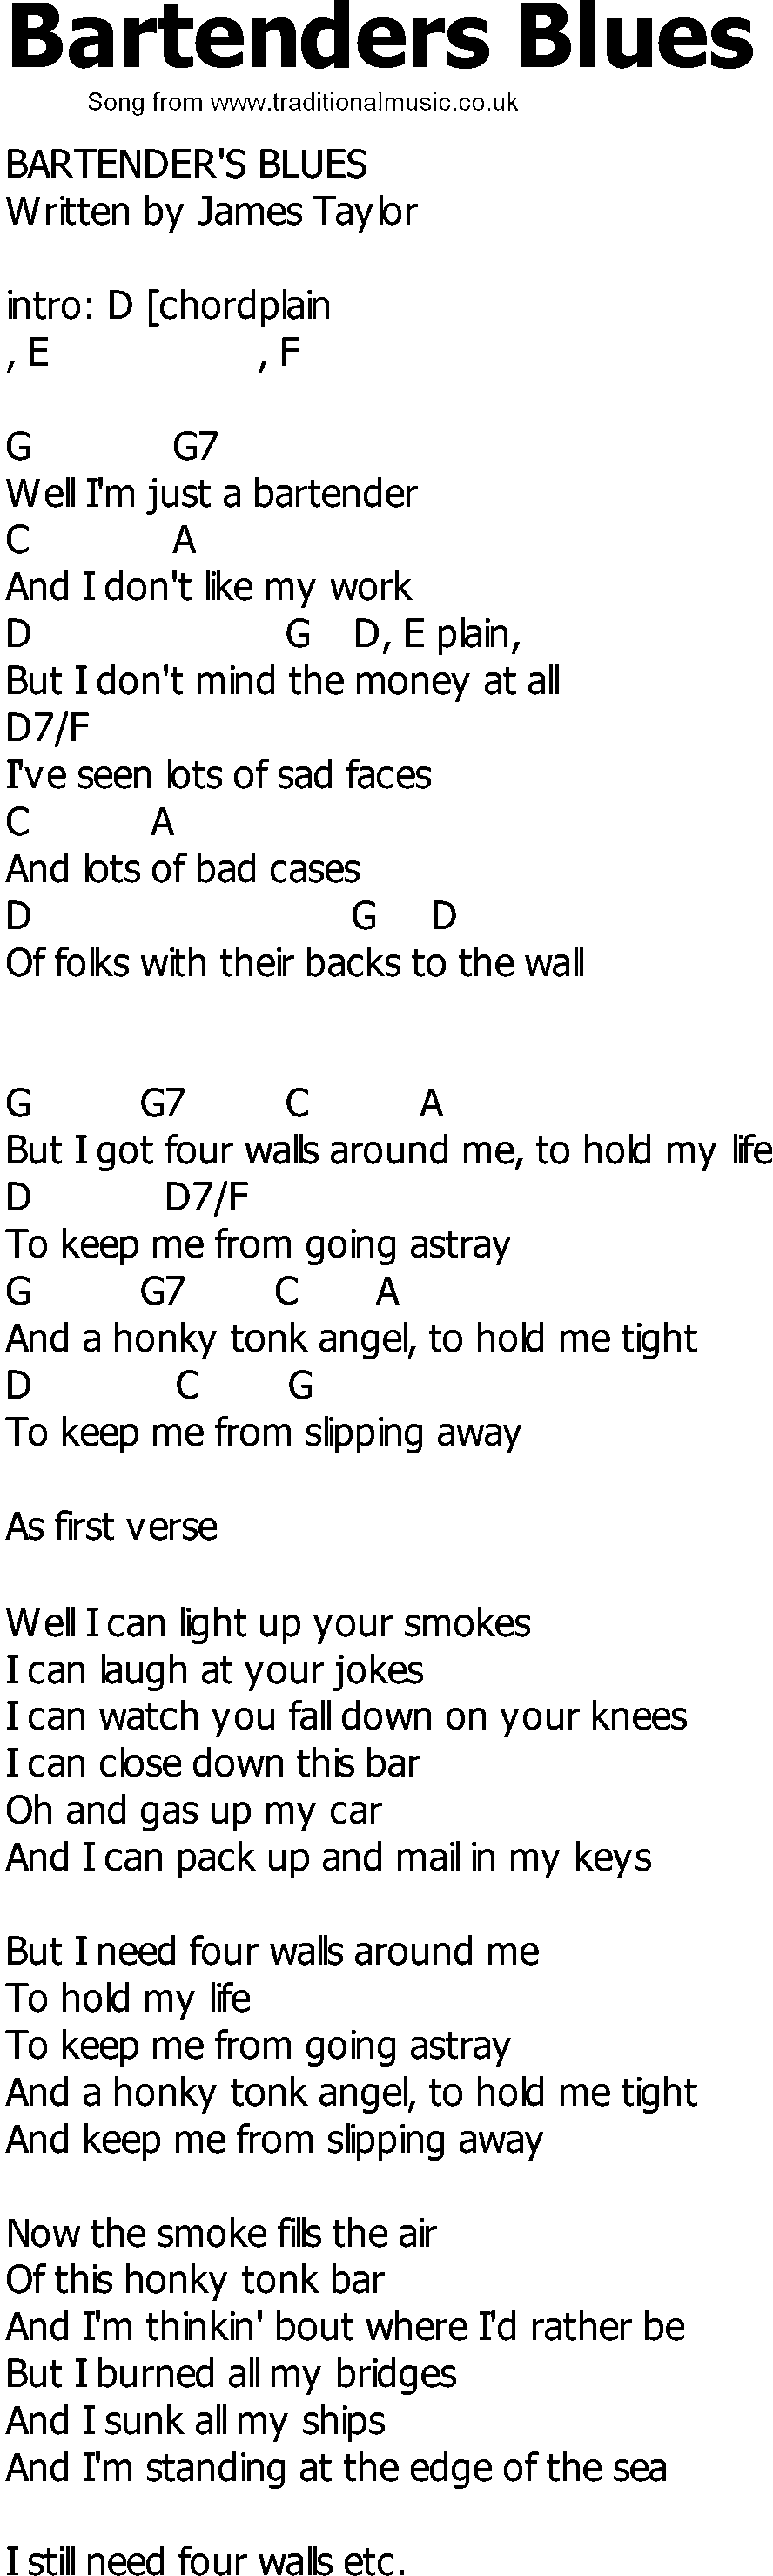 Old Country song lyrics with chords - Bartenders Blues